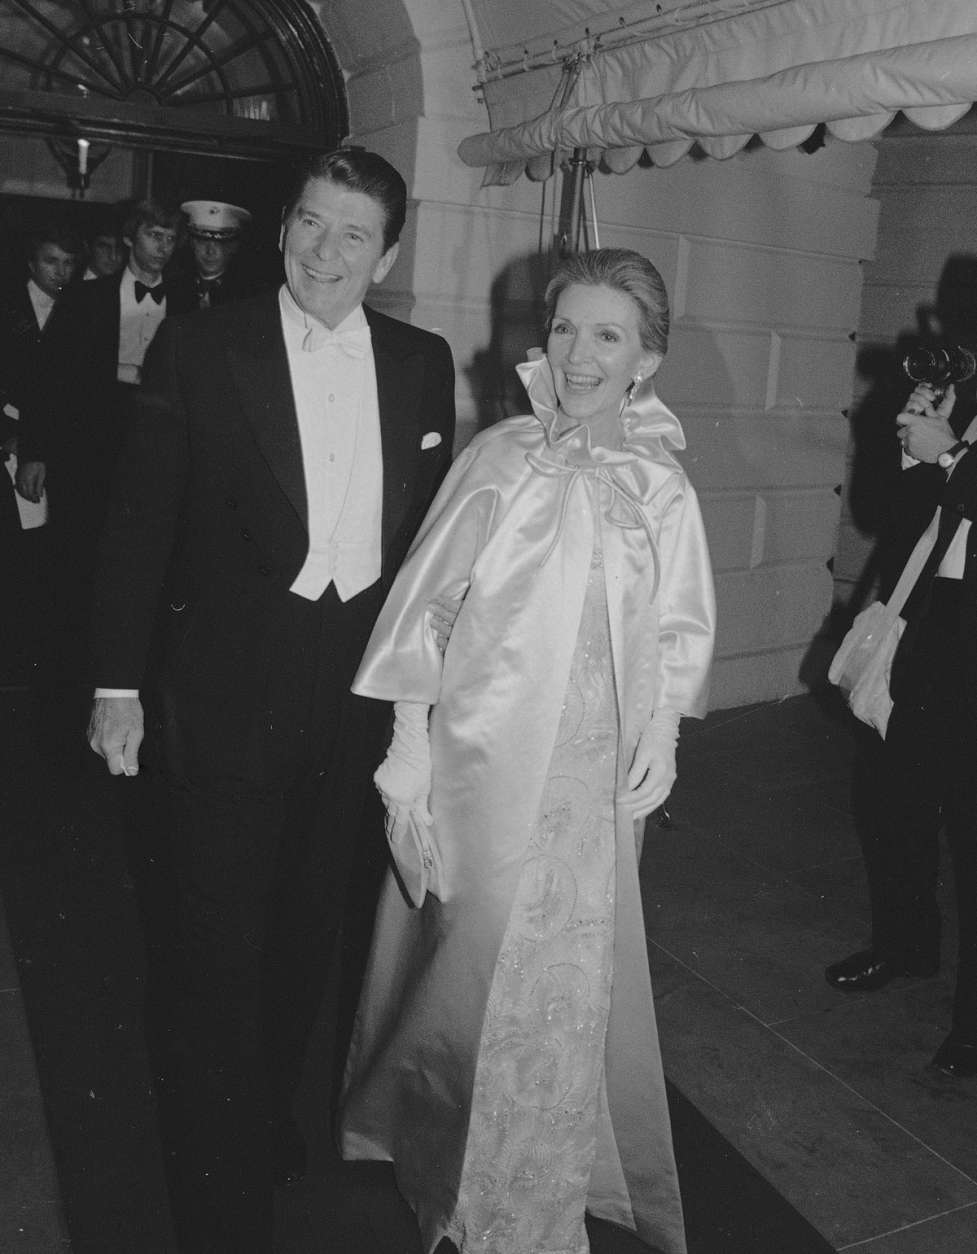 Pres. Ronald Reagan and first lady Nancy Reagan leave the White House to attend the first of several inaugural balls in Washington, Jan. 20, 1981. (AP Photo)